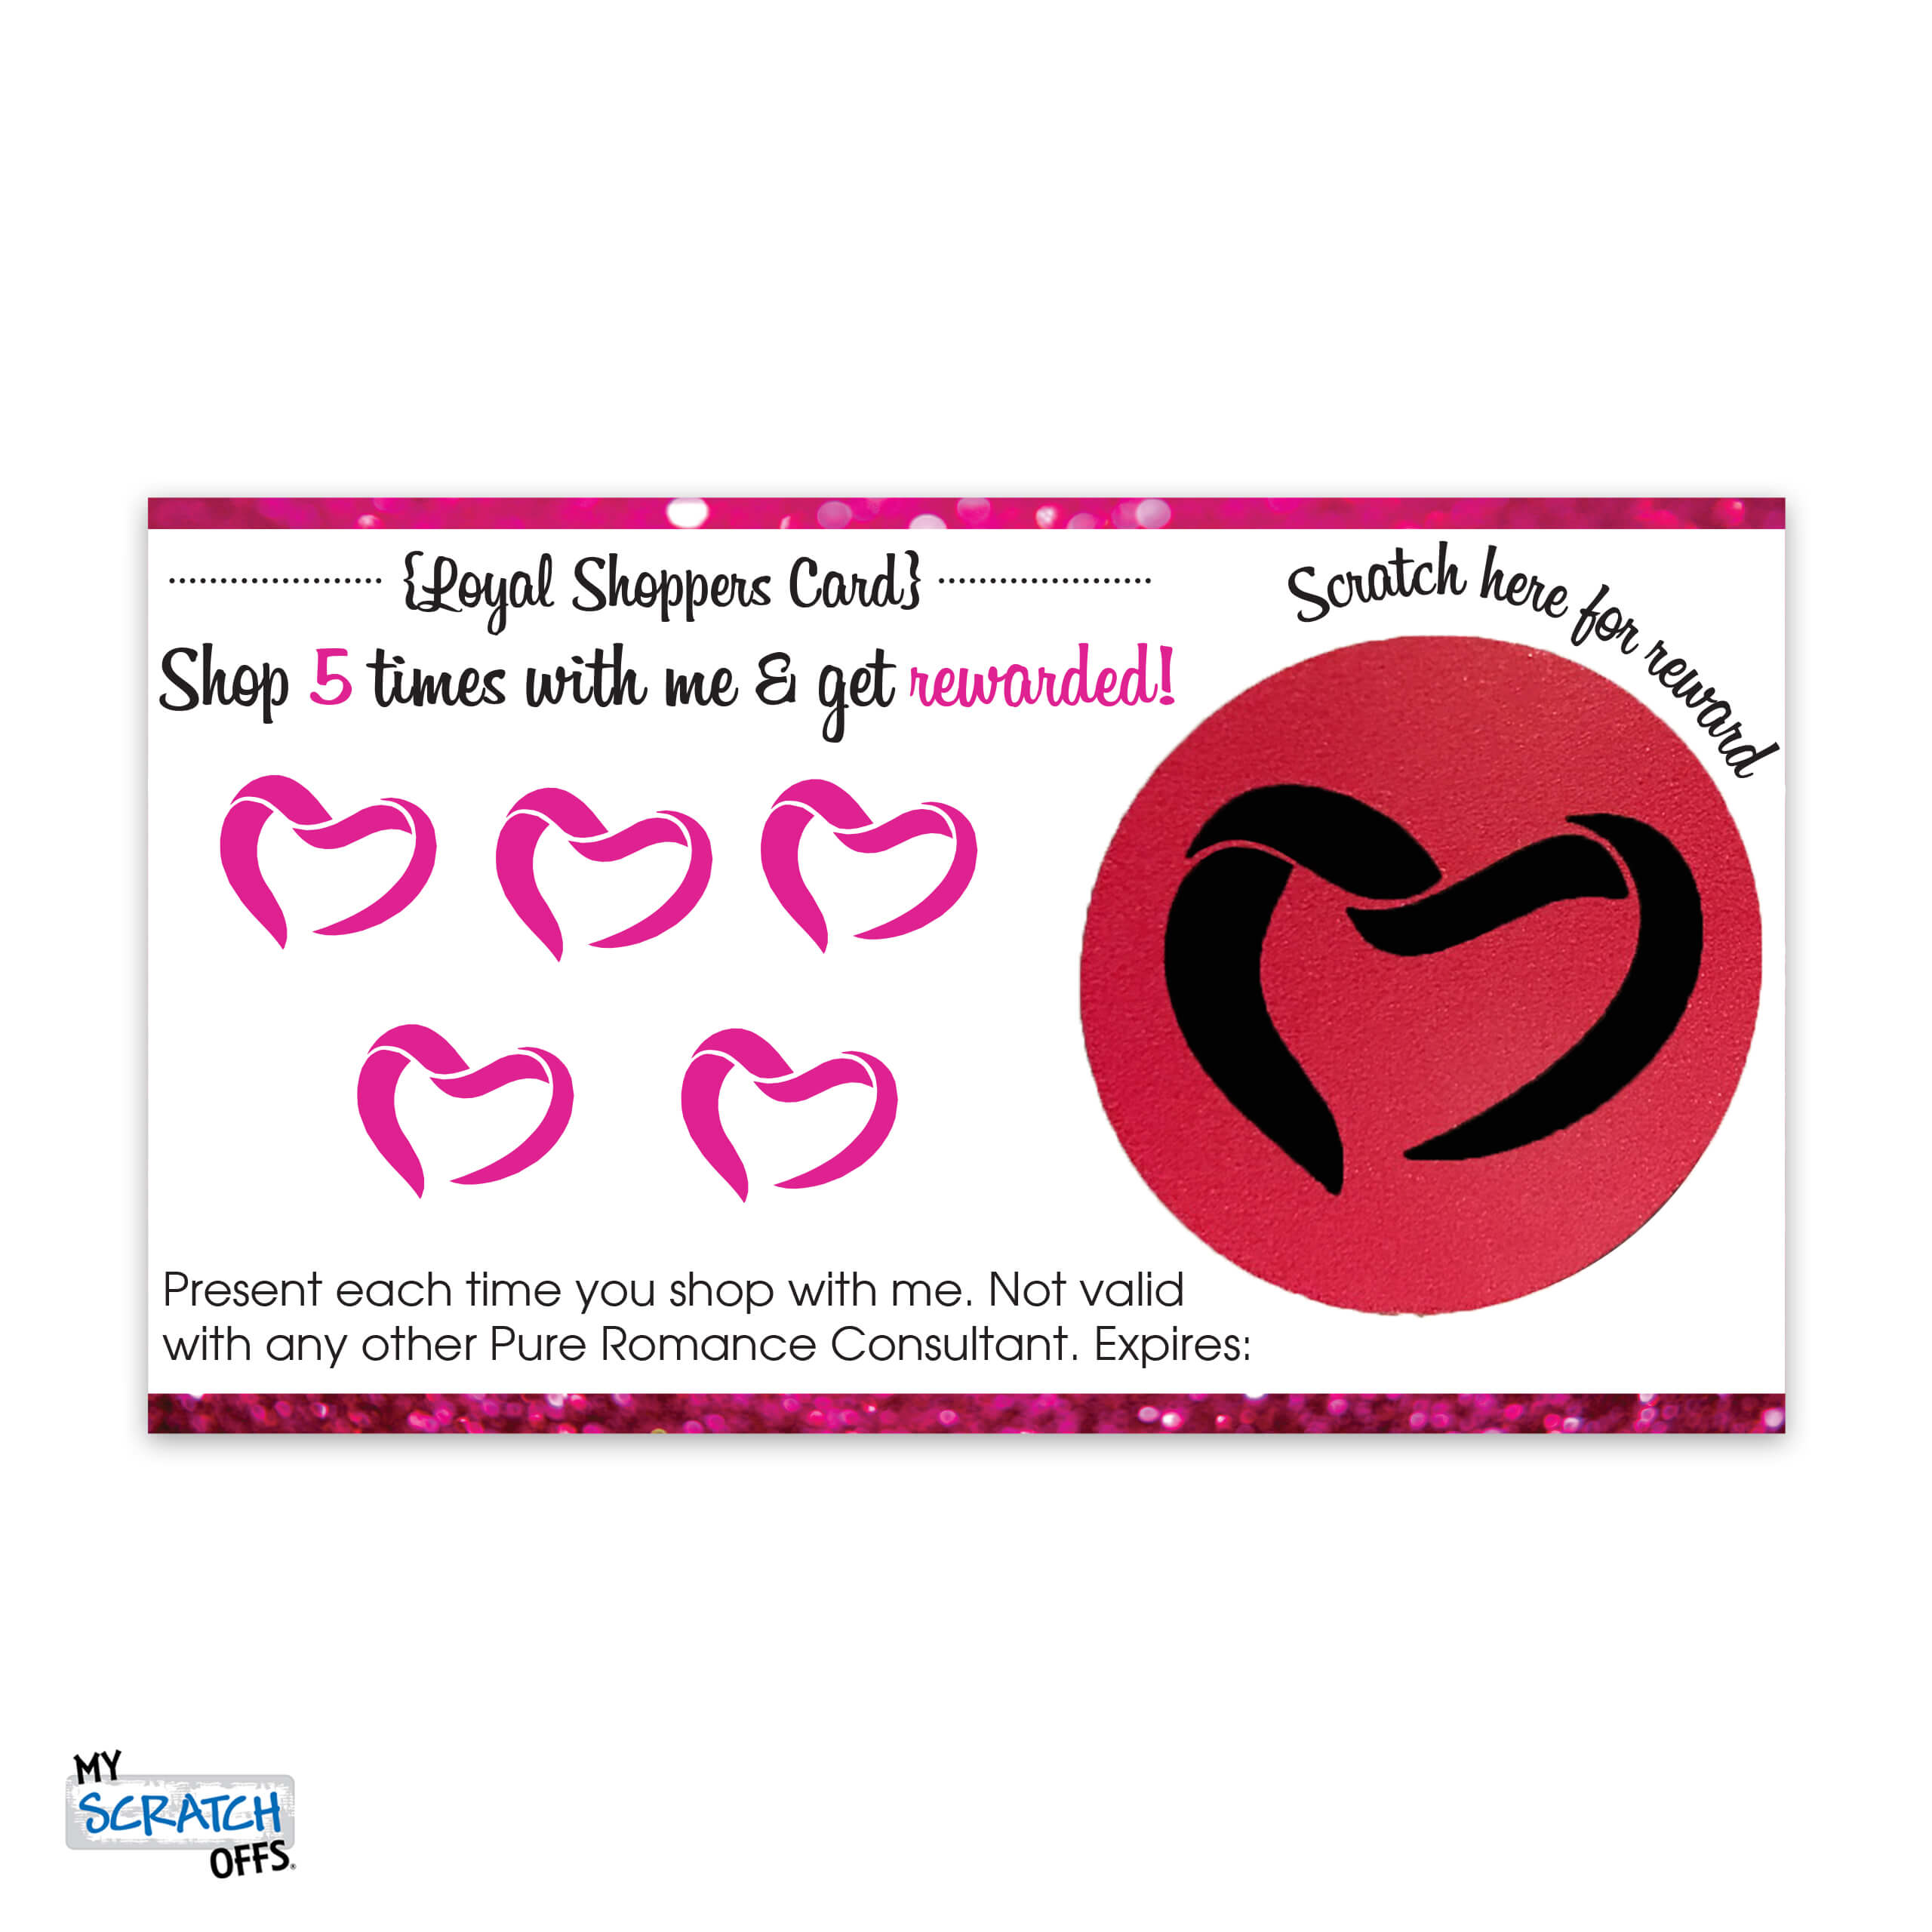 Pure Romance Loyal Shopper Card Scratch Off Party Promotion for DIY Self-Print (Digital Download)